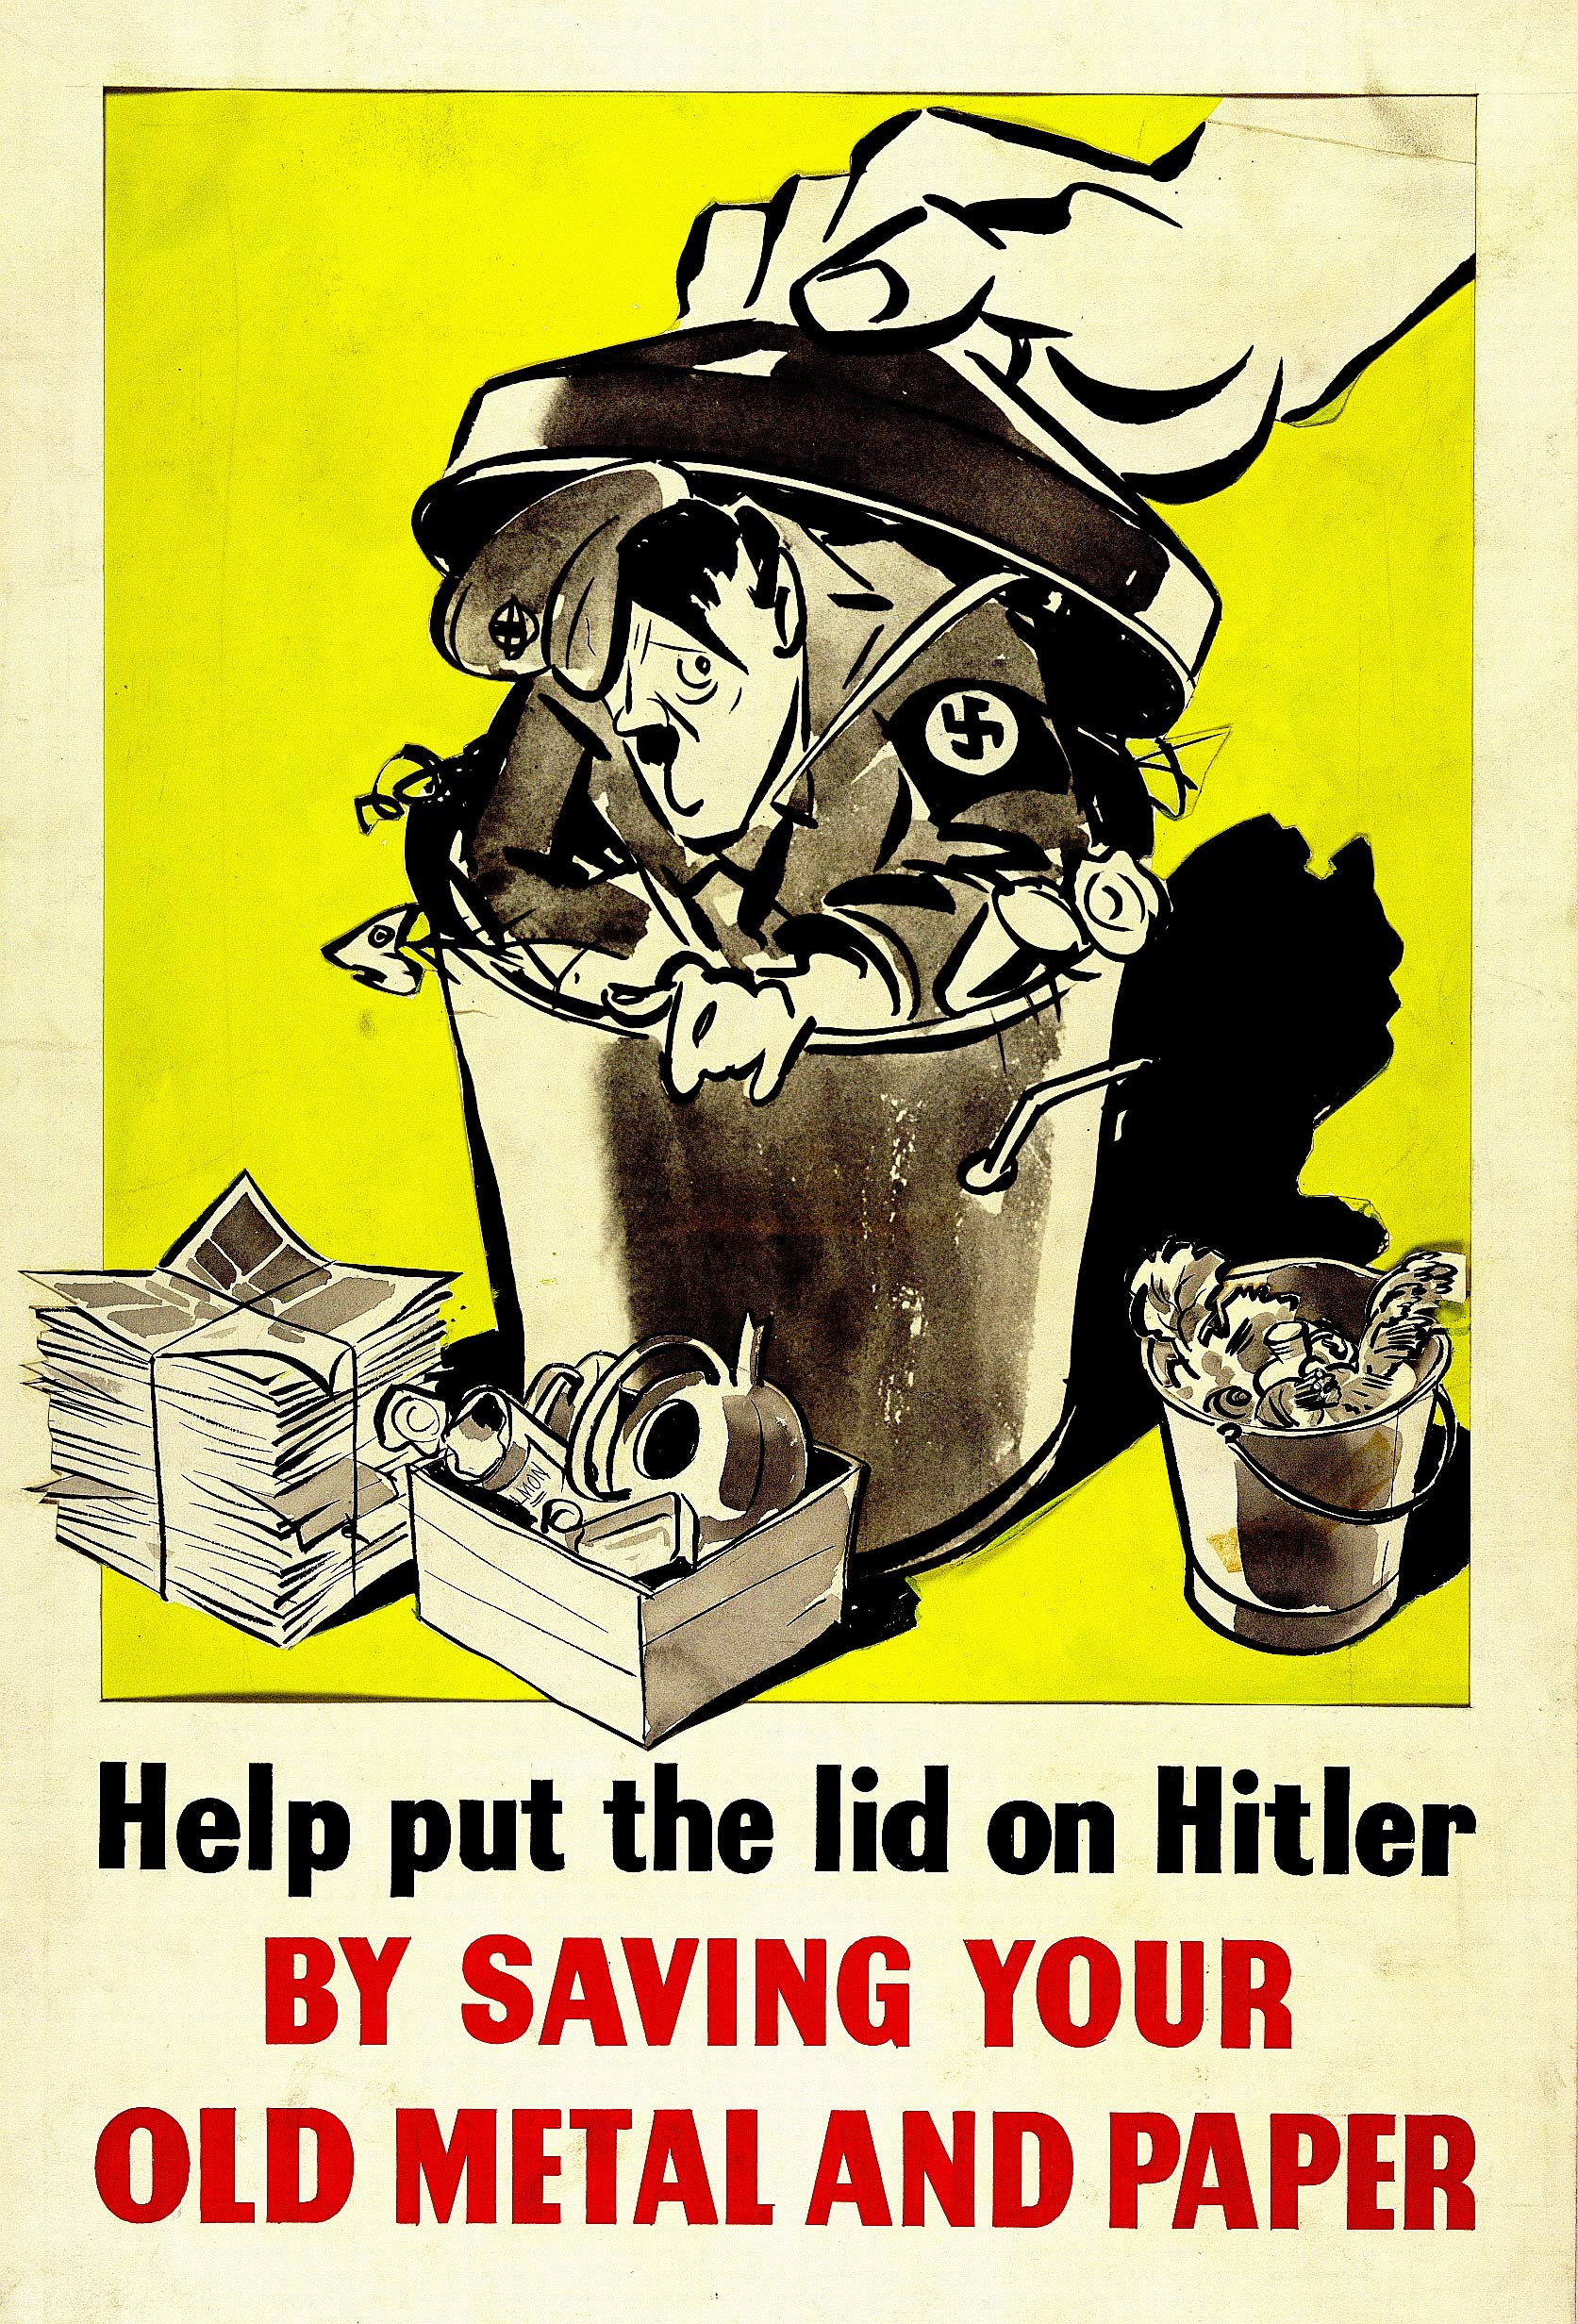 Put lid on Hitler" - The National Archives